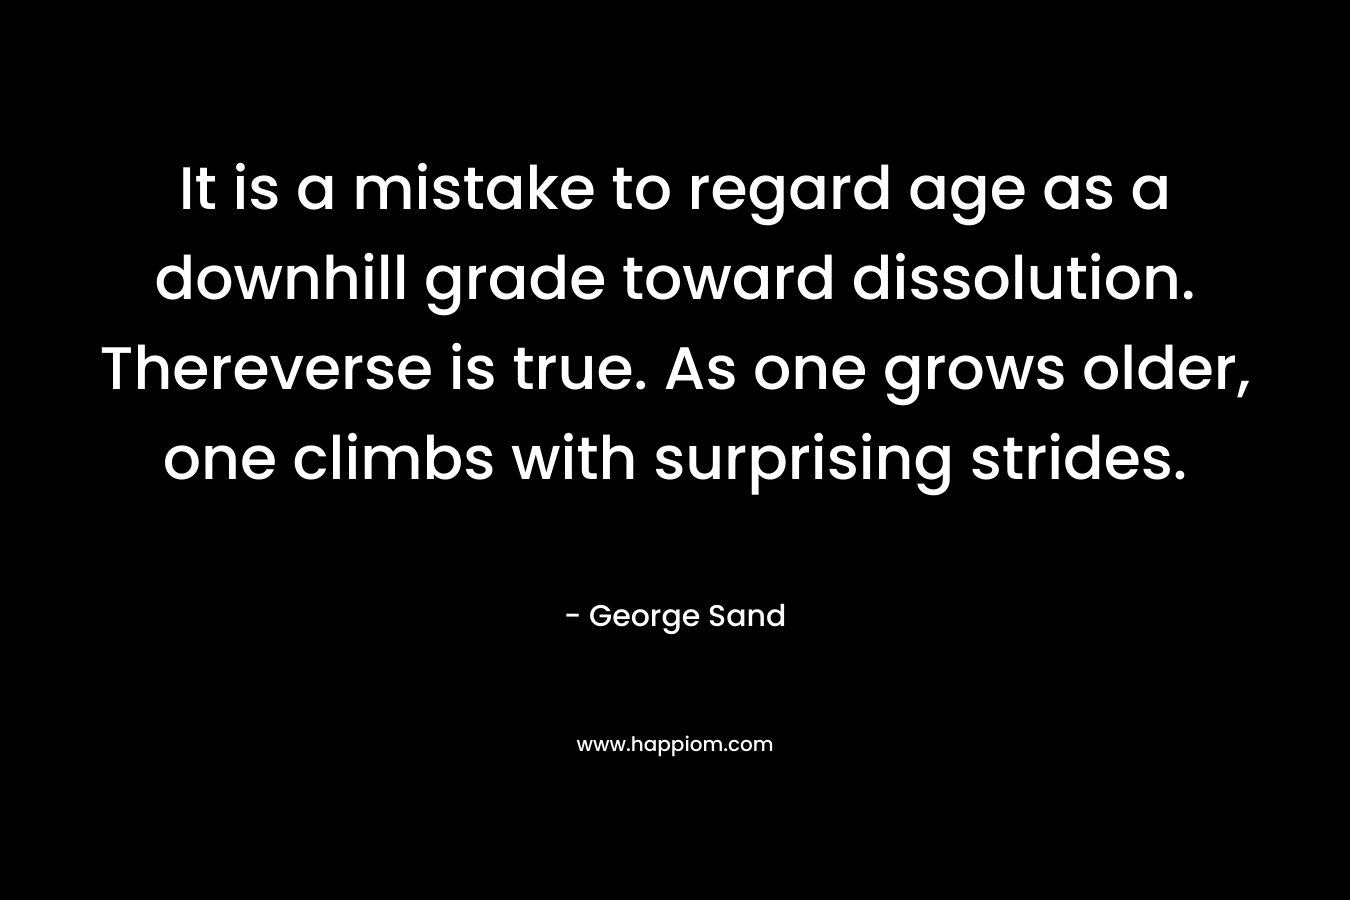 It is a mistake to regard age as a downhill grade toward dissolution. Thereverse is true. As one grows older, one climbs with surprising strides.